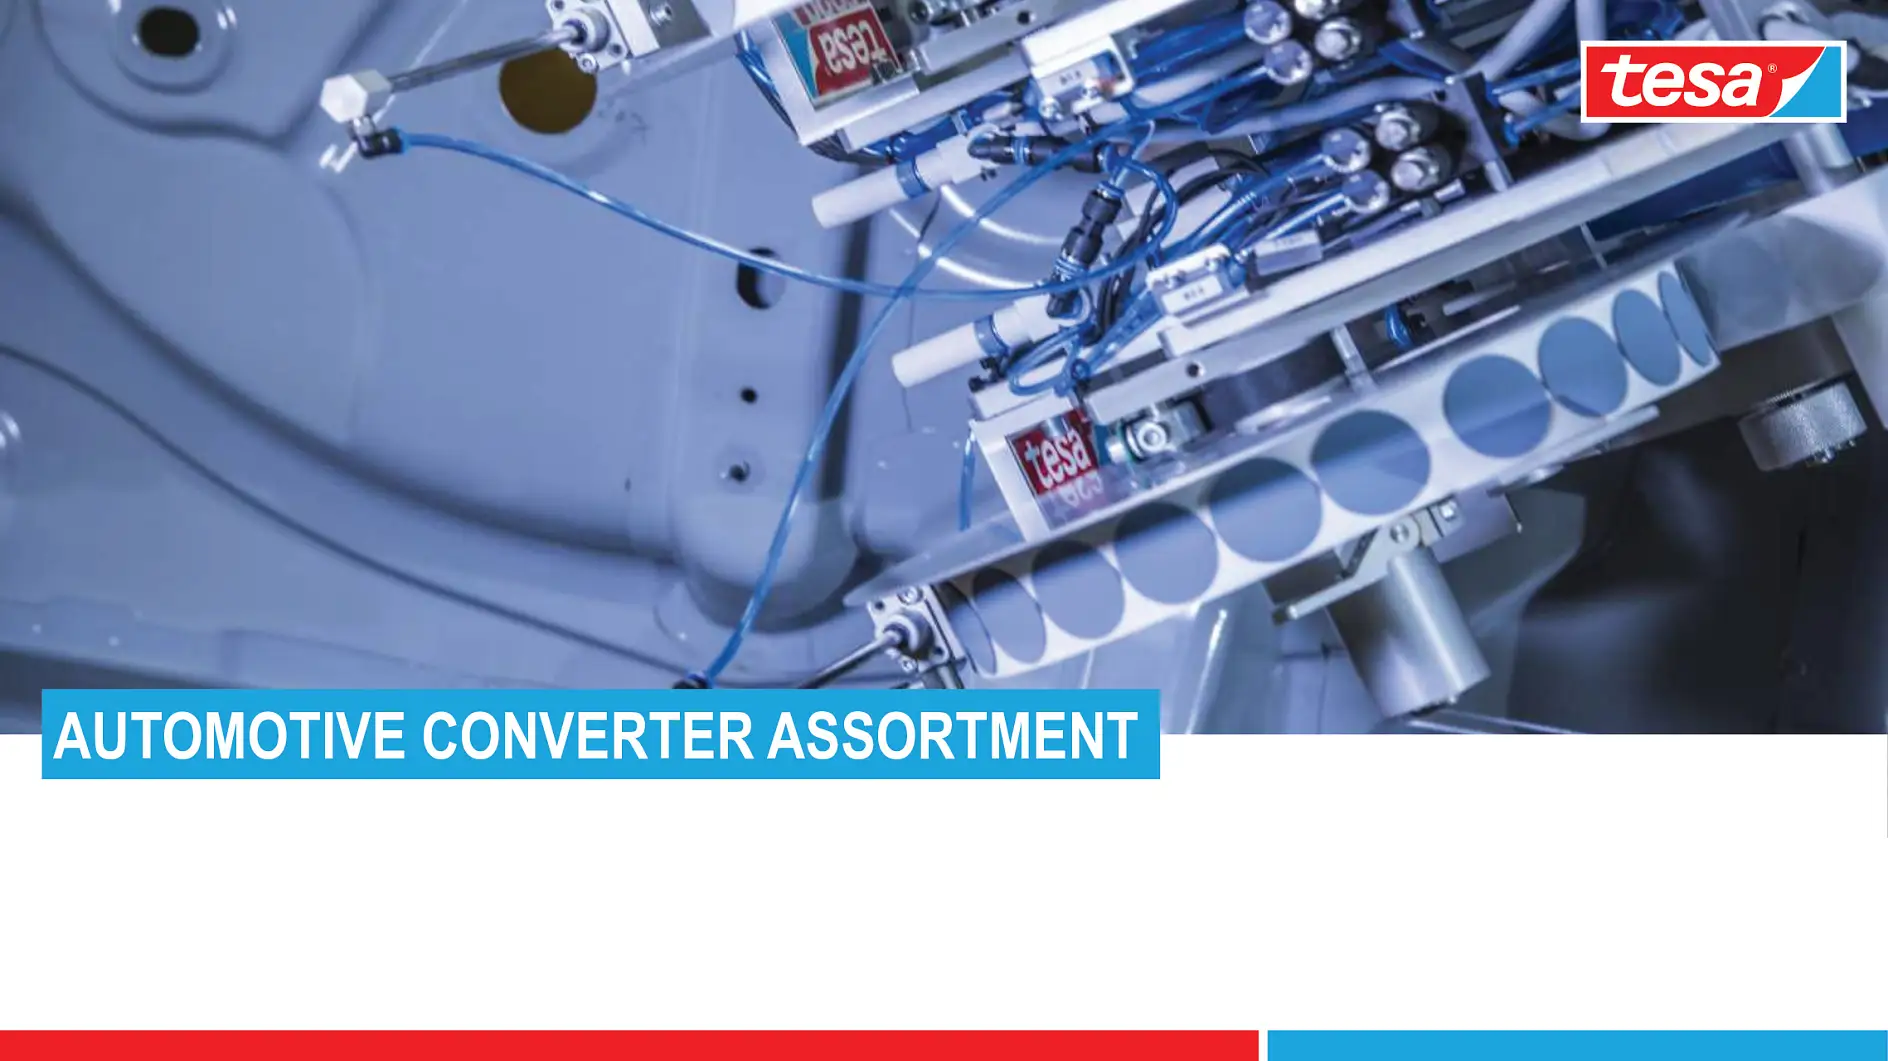 Converter core assortment for the Automotive industry